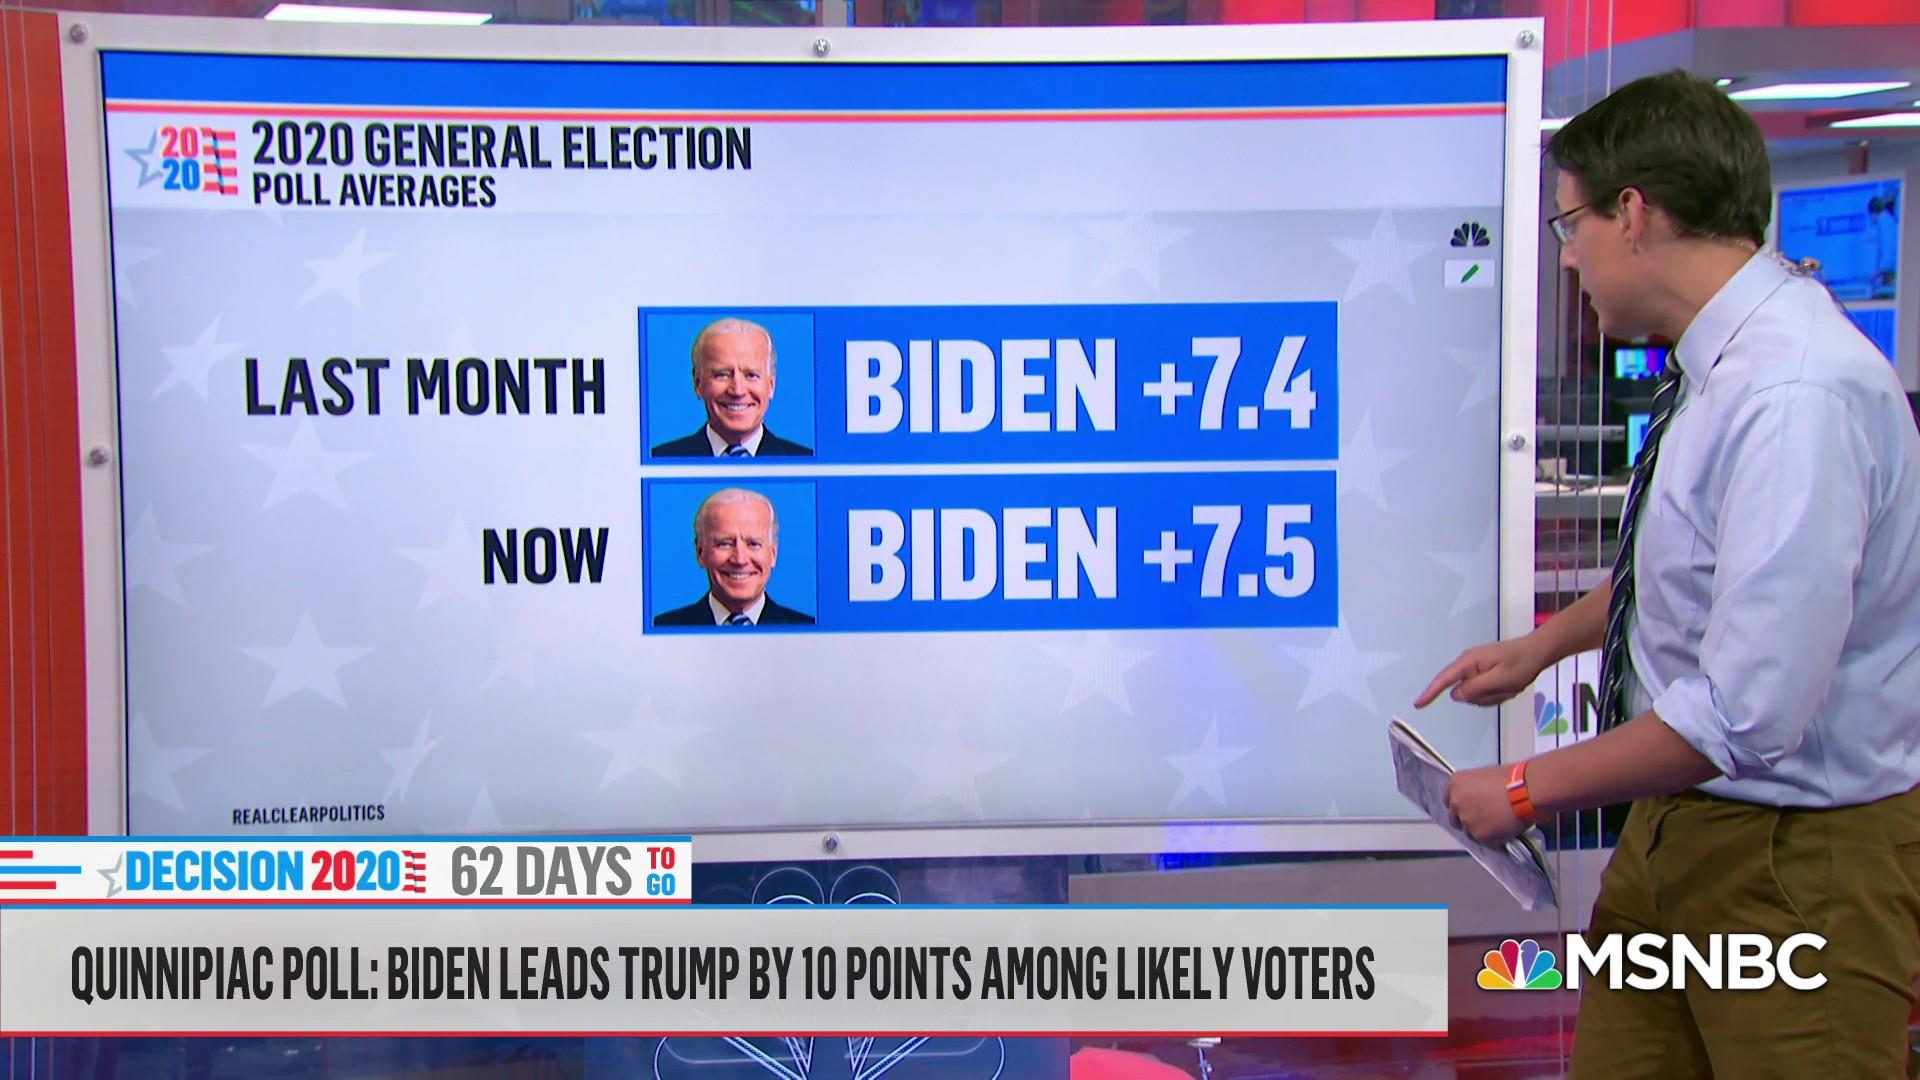 Trump's new strategy against Biden of trouble, polls show